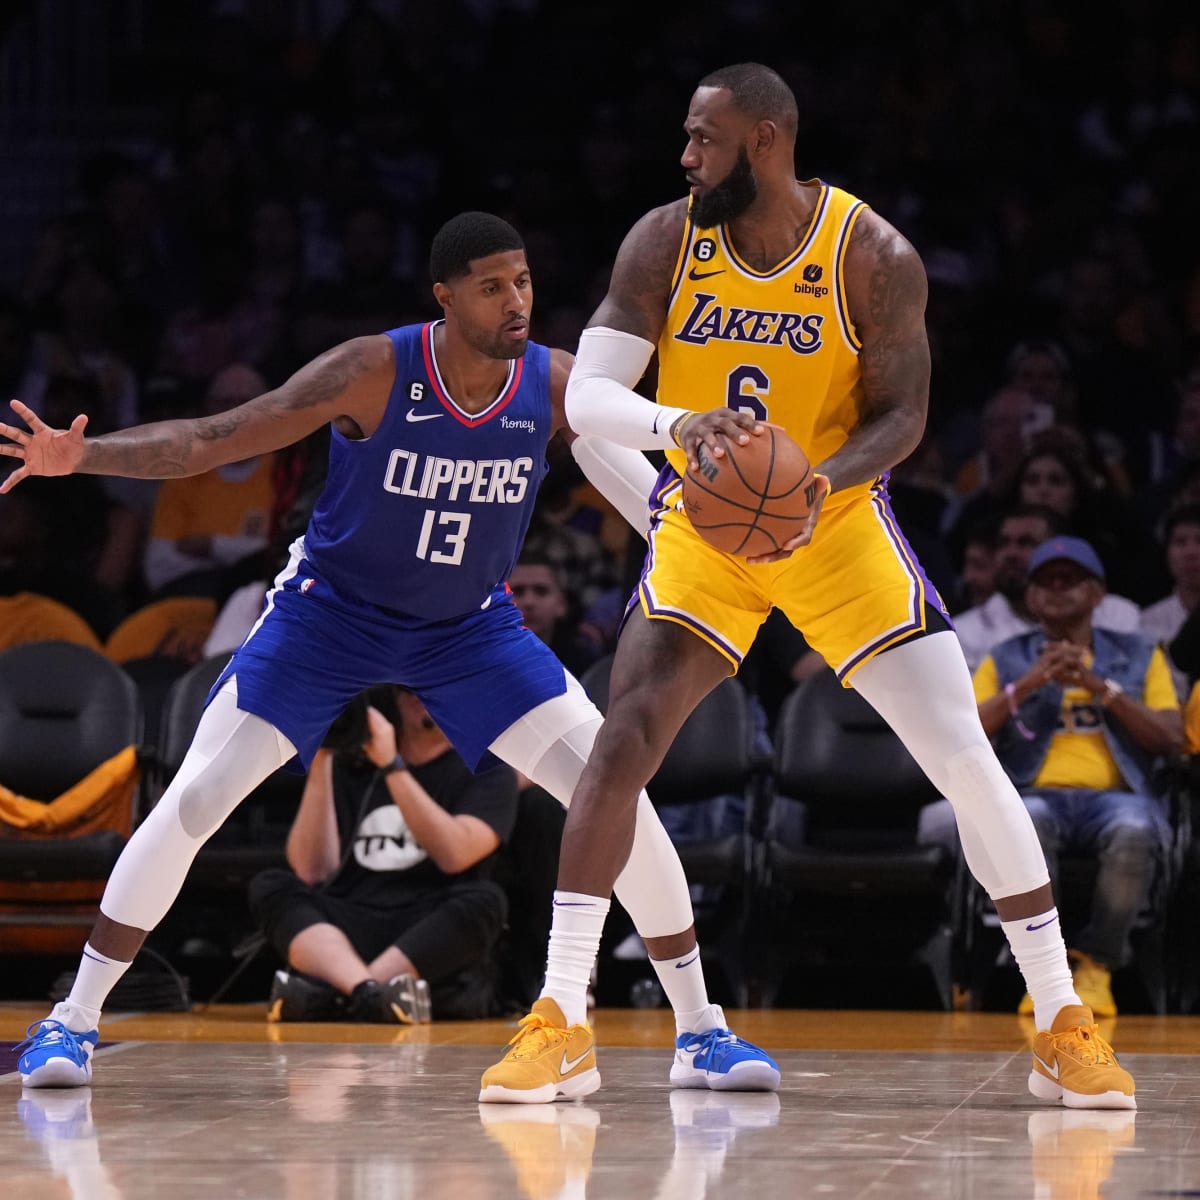 Clippers Beat Lakers and Clinch First Division Title - The New York